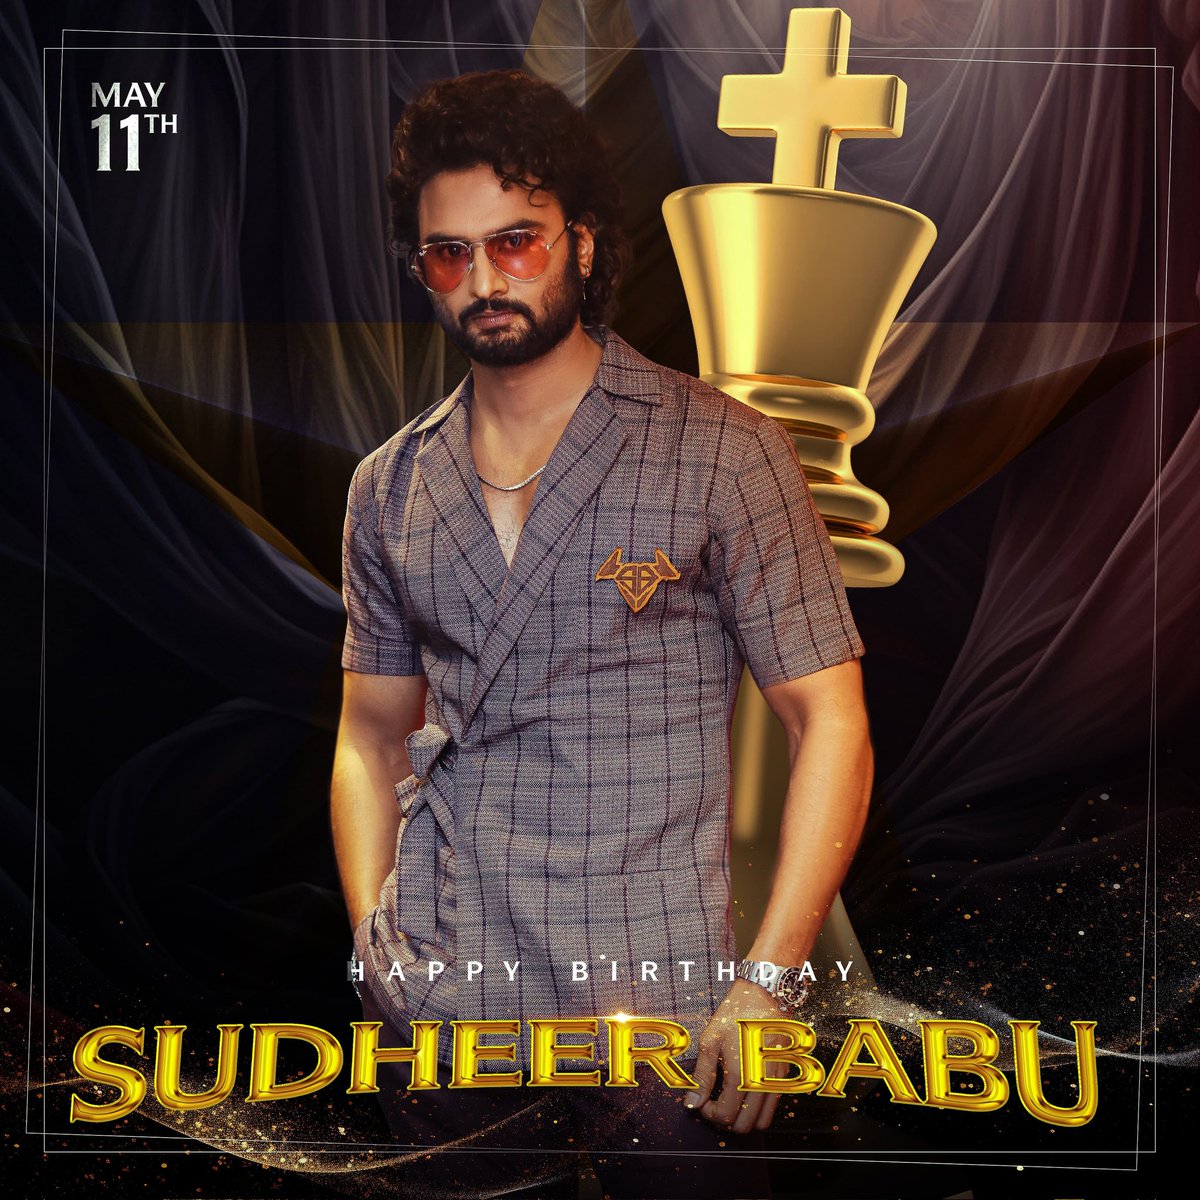 Here's the special CDP to celebrate most charismatic hero and handsome hunk @Isudheerbabu Birthday 💫🔥 Advance Birthday wishes to the hard-working and incredibly talented actor #SudheerBabu 🎉 #HBDSudheerBabu #ShreyasMedia #ShreyasGroup